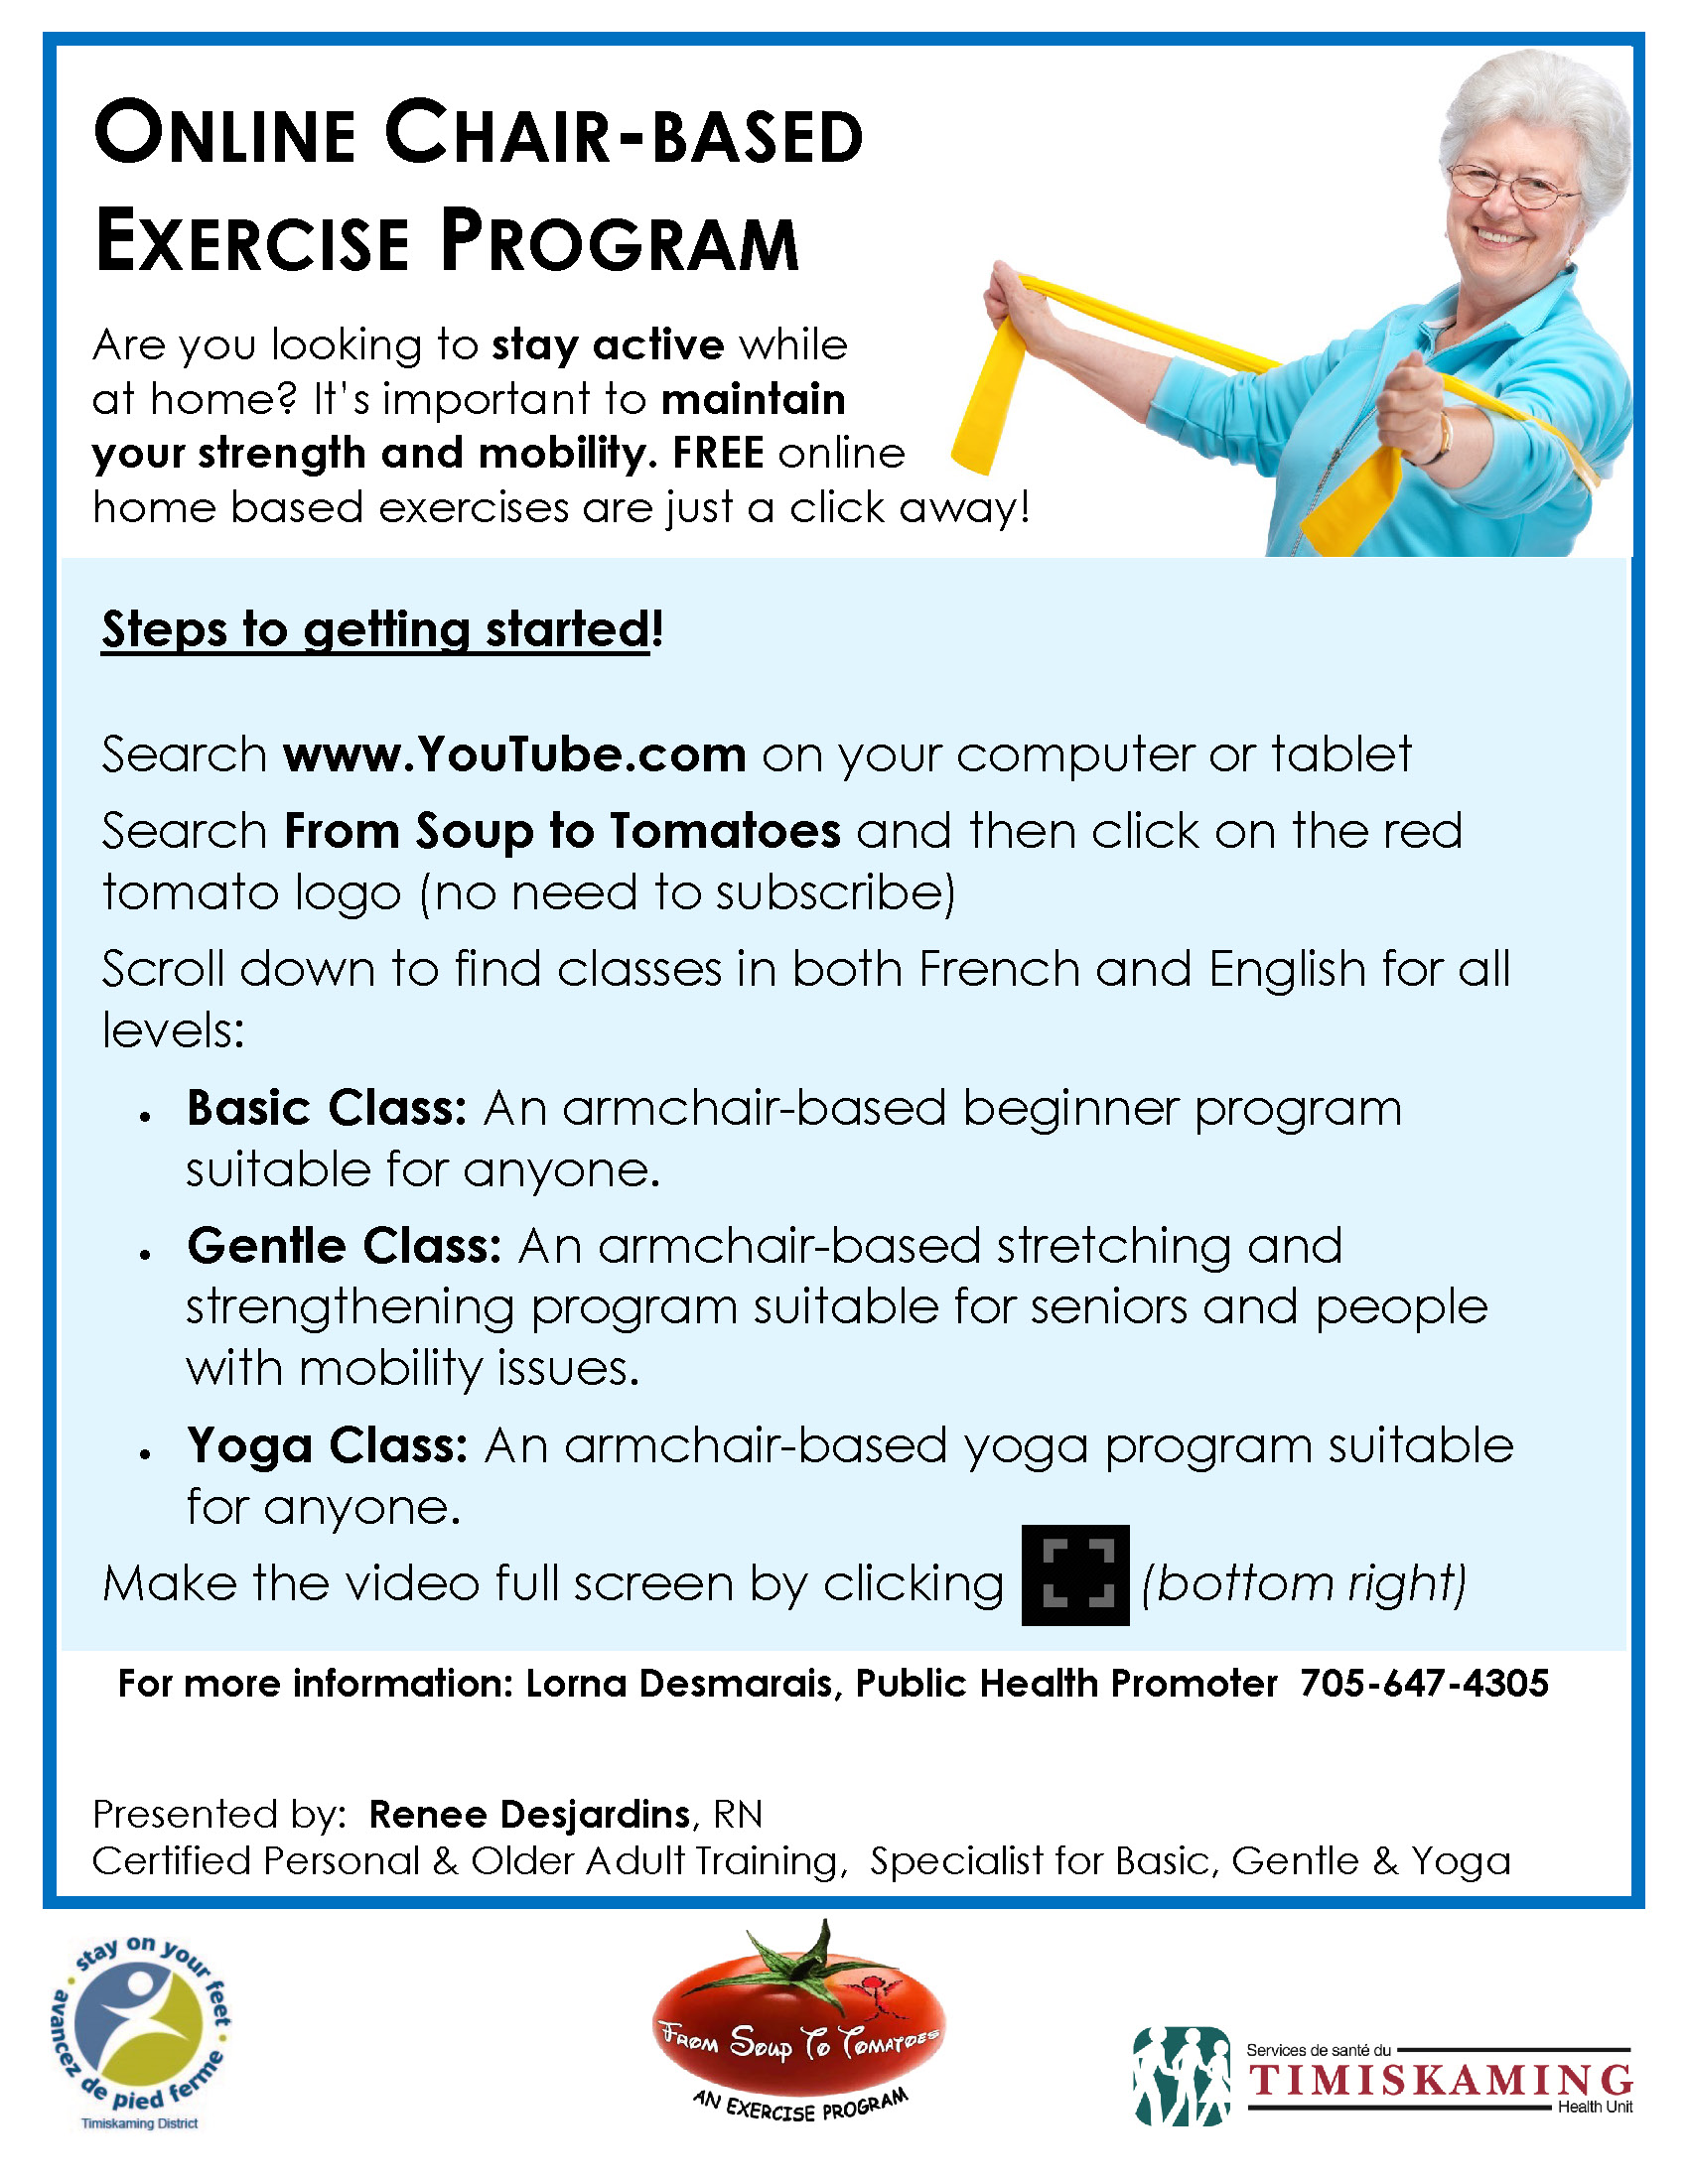 FREE Exercise Classes for Older Adults